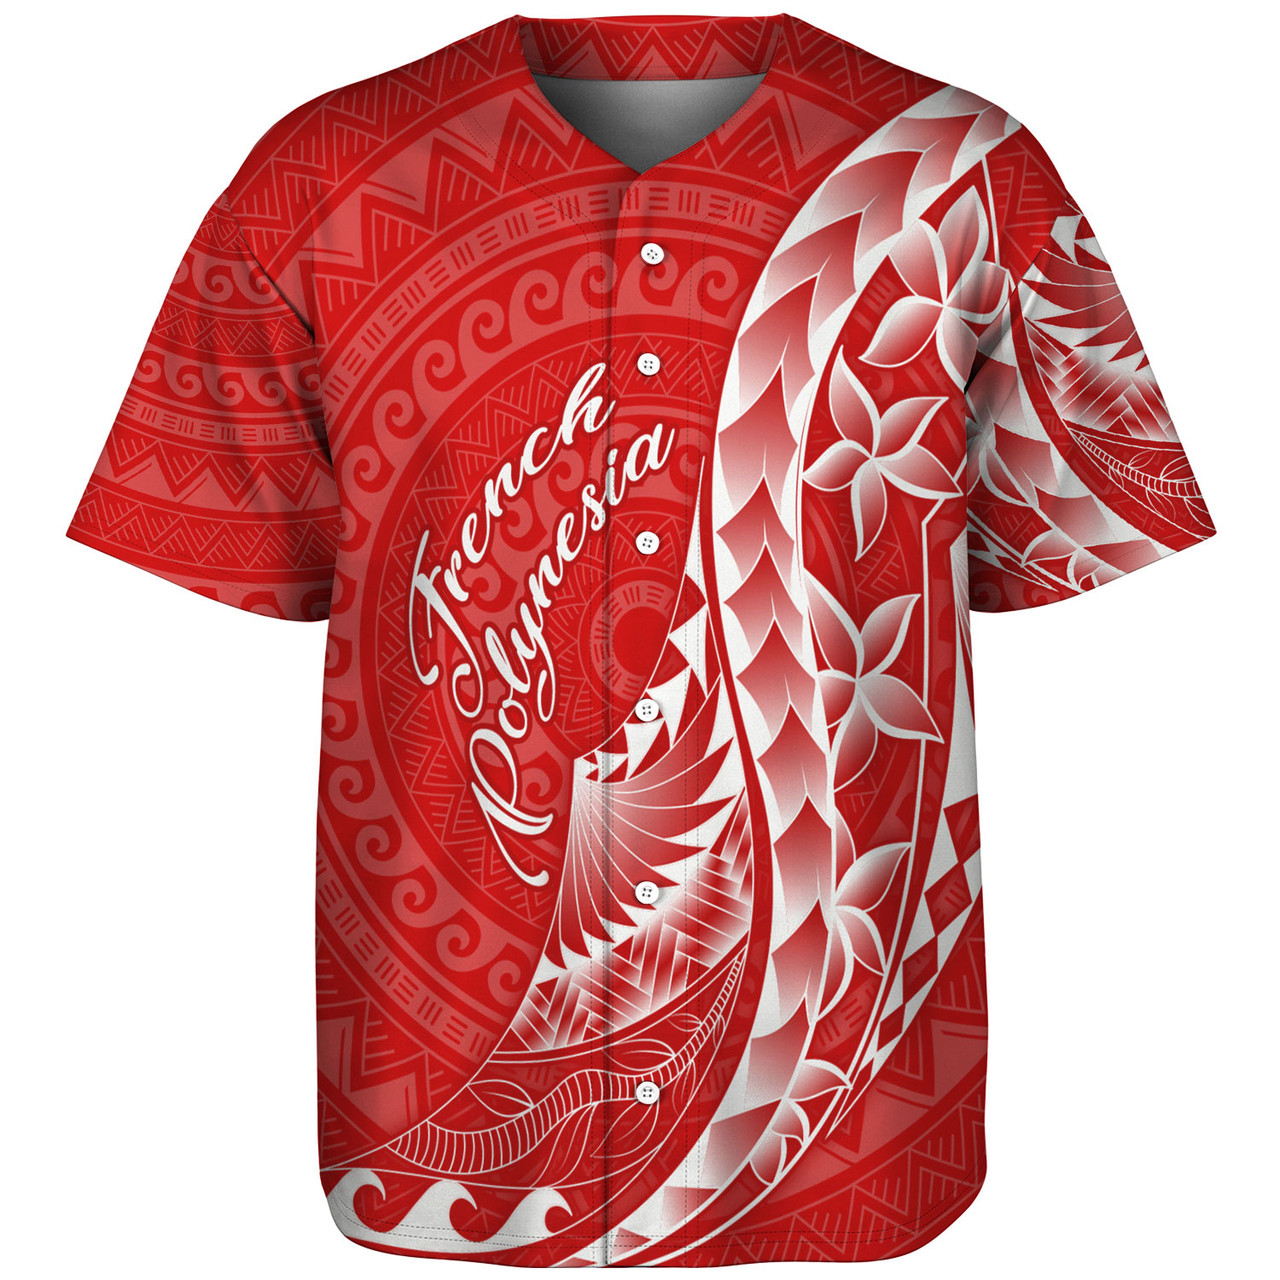 French Polynesia Custom Personalised Baseball Shirt Coat Of Arms Tribal Patterns Style